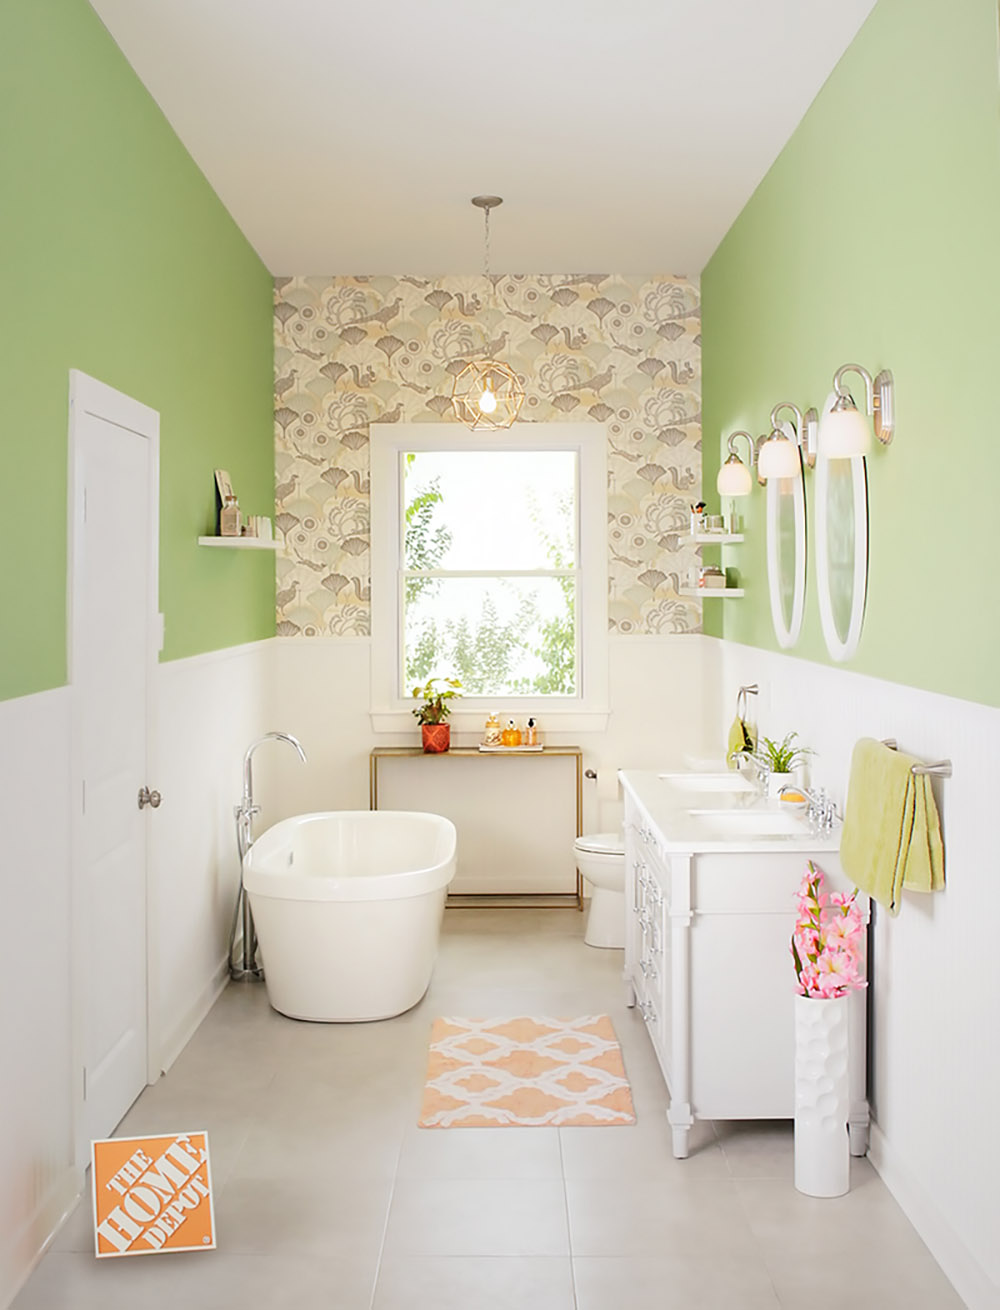 A bathroom with a floral accent wall and window.